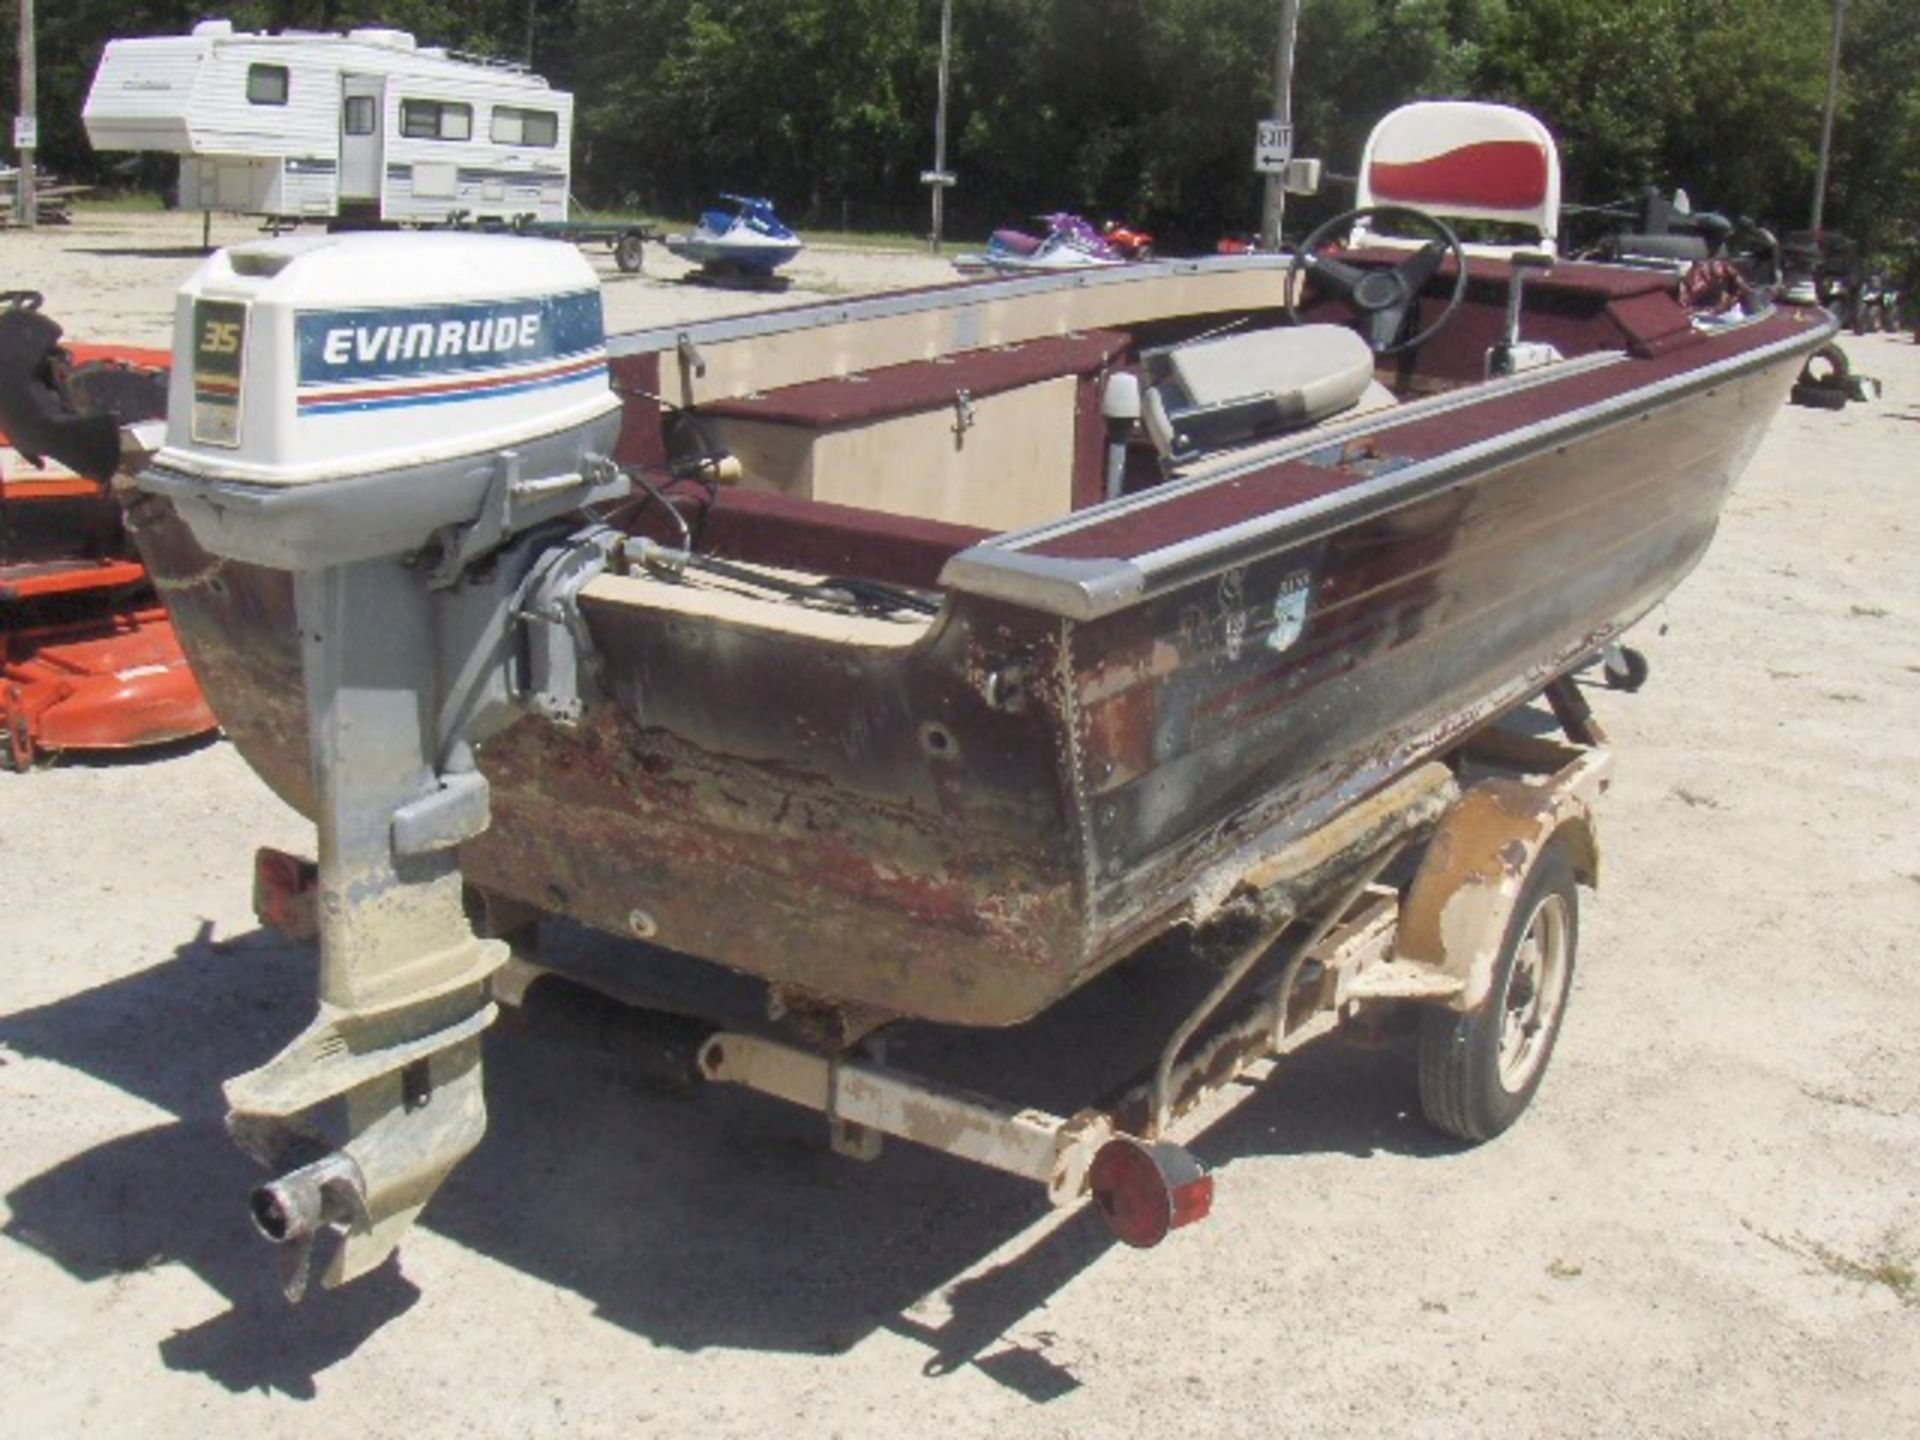 1983 SMOKERCRAFT 35HP W/TRLMSR 1 AXLE 18'TRLR 1 AXLE 18'TRLR  NO S# boat w/trailer, owner started at - Image 2 of 4